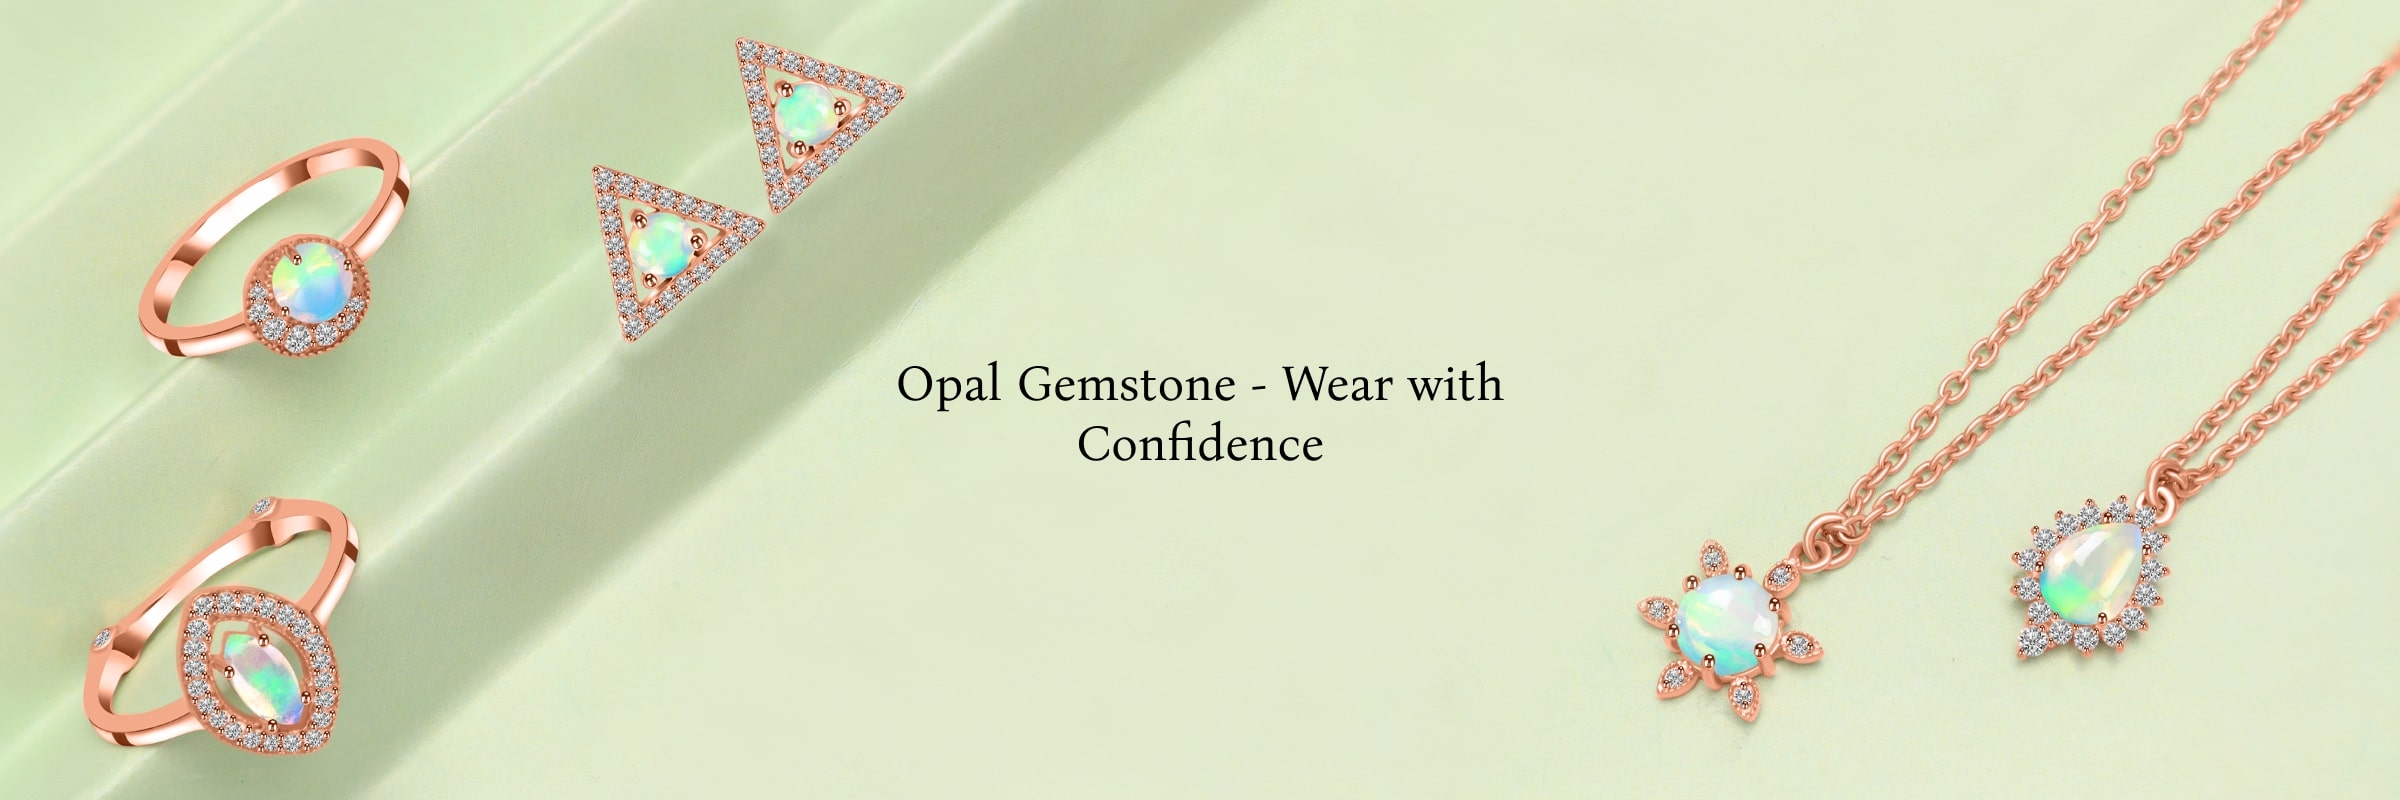 How to Wear and Choose Opal Gemstone